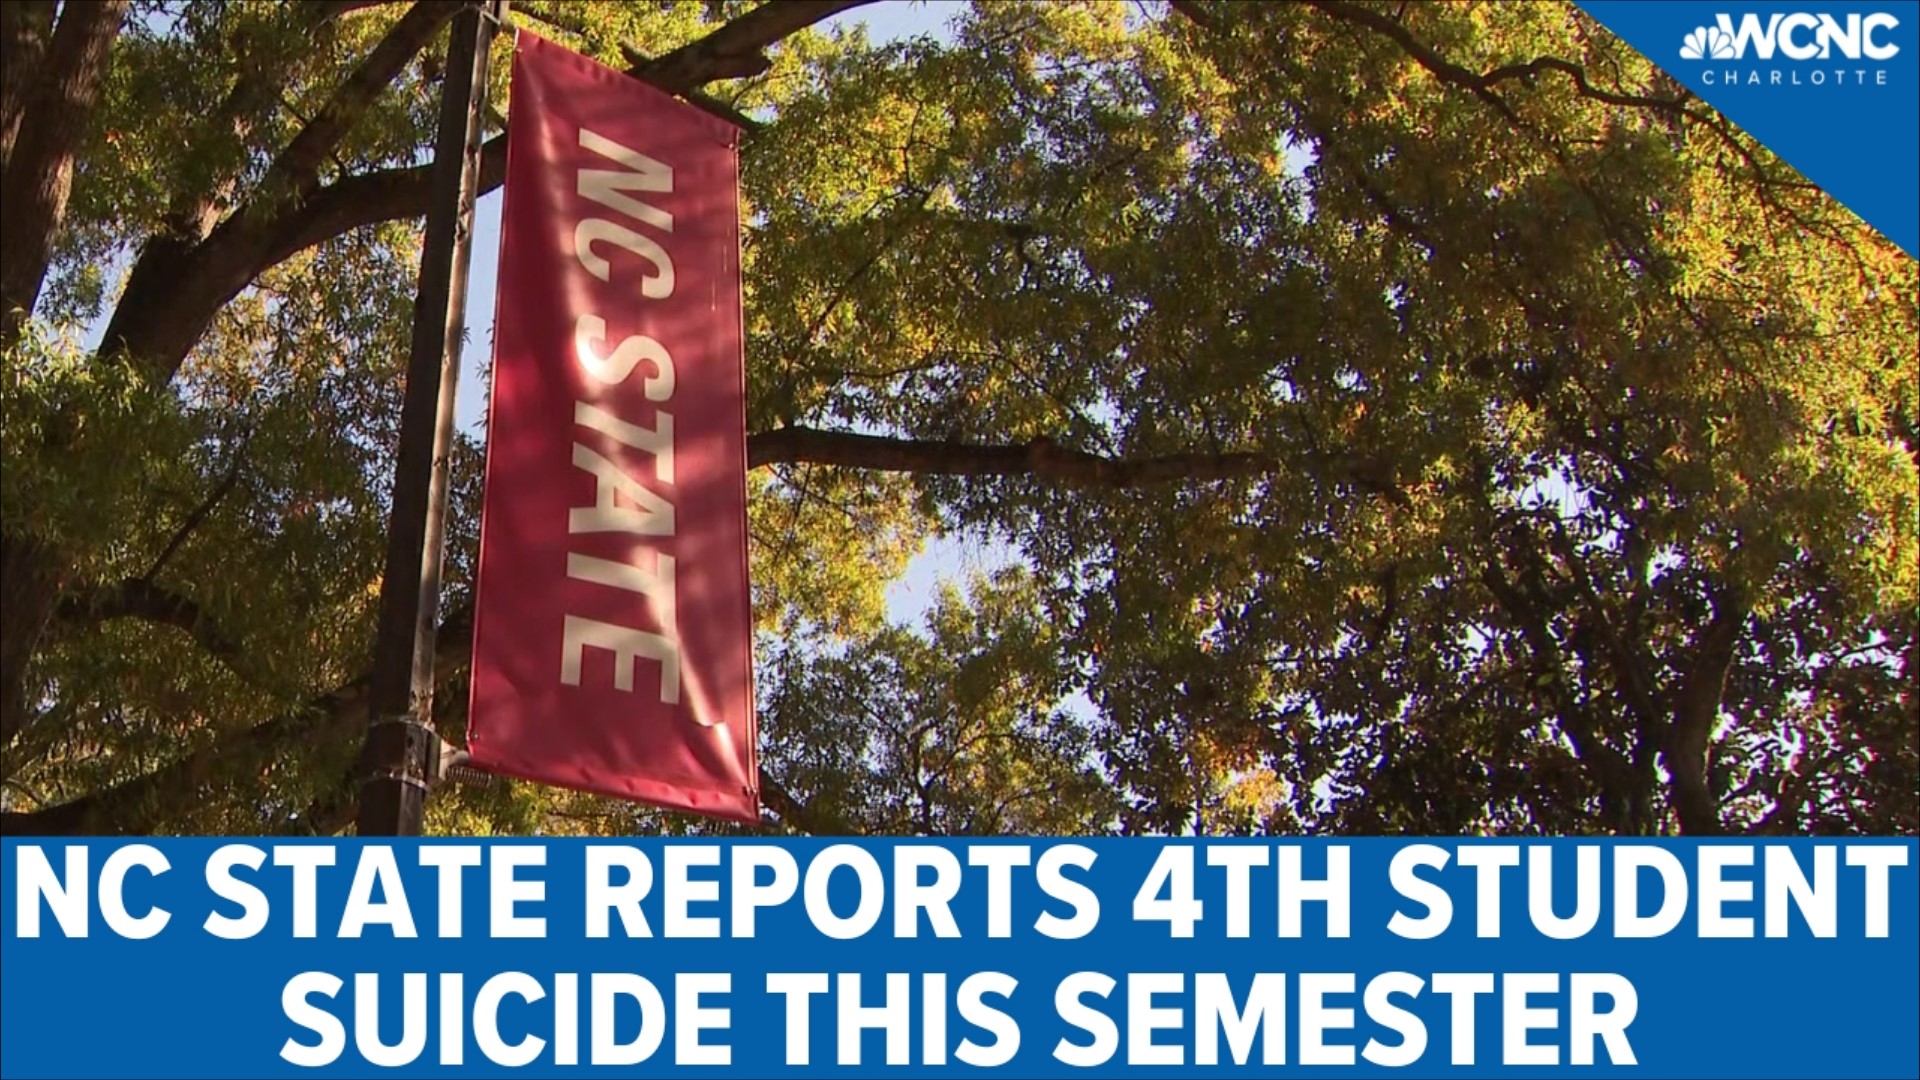 4th NC State student dies by suicide, spotlighting mental health